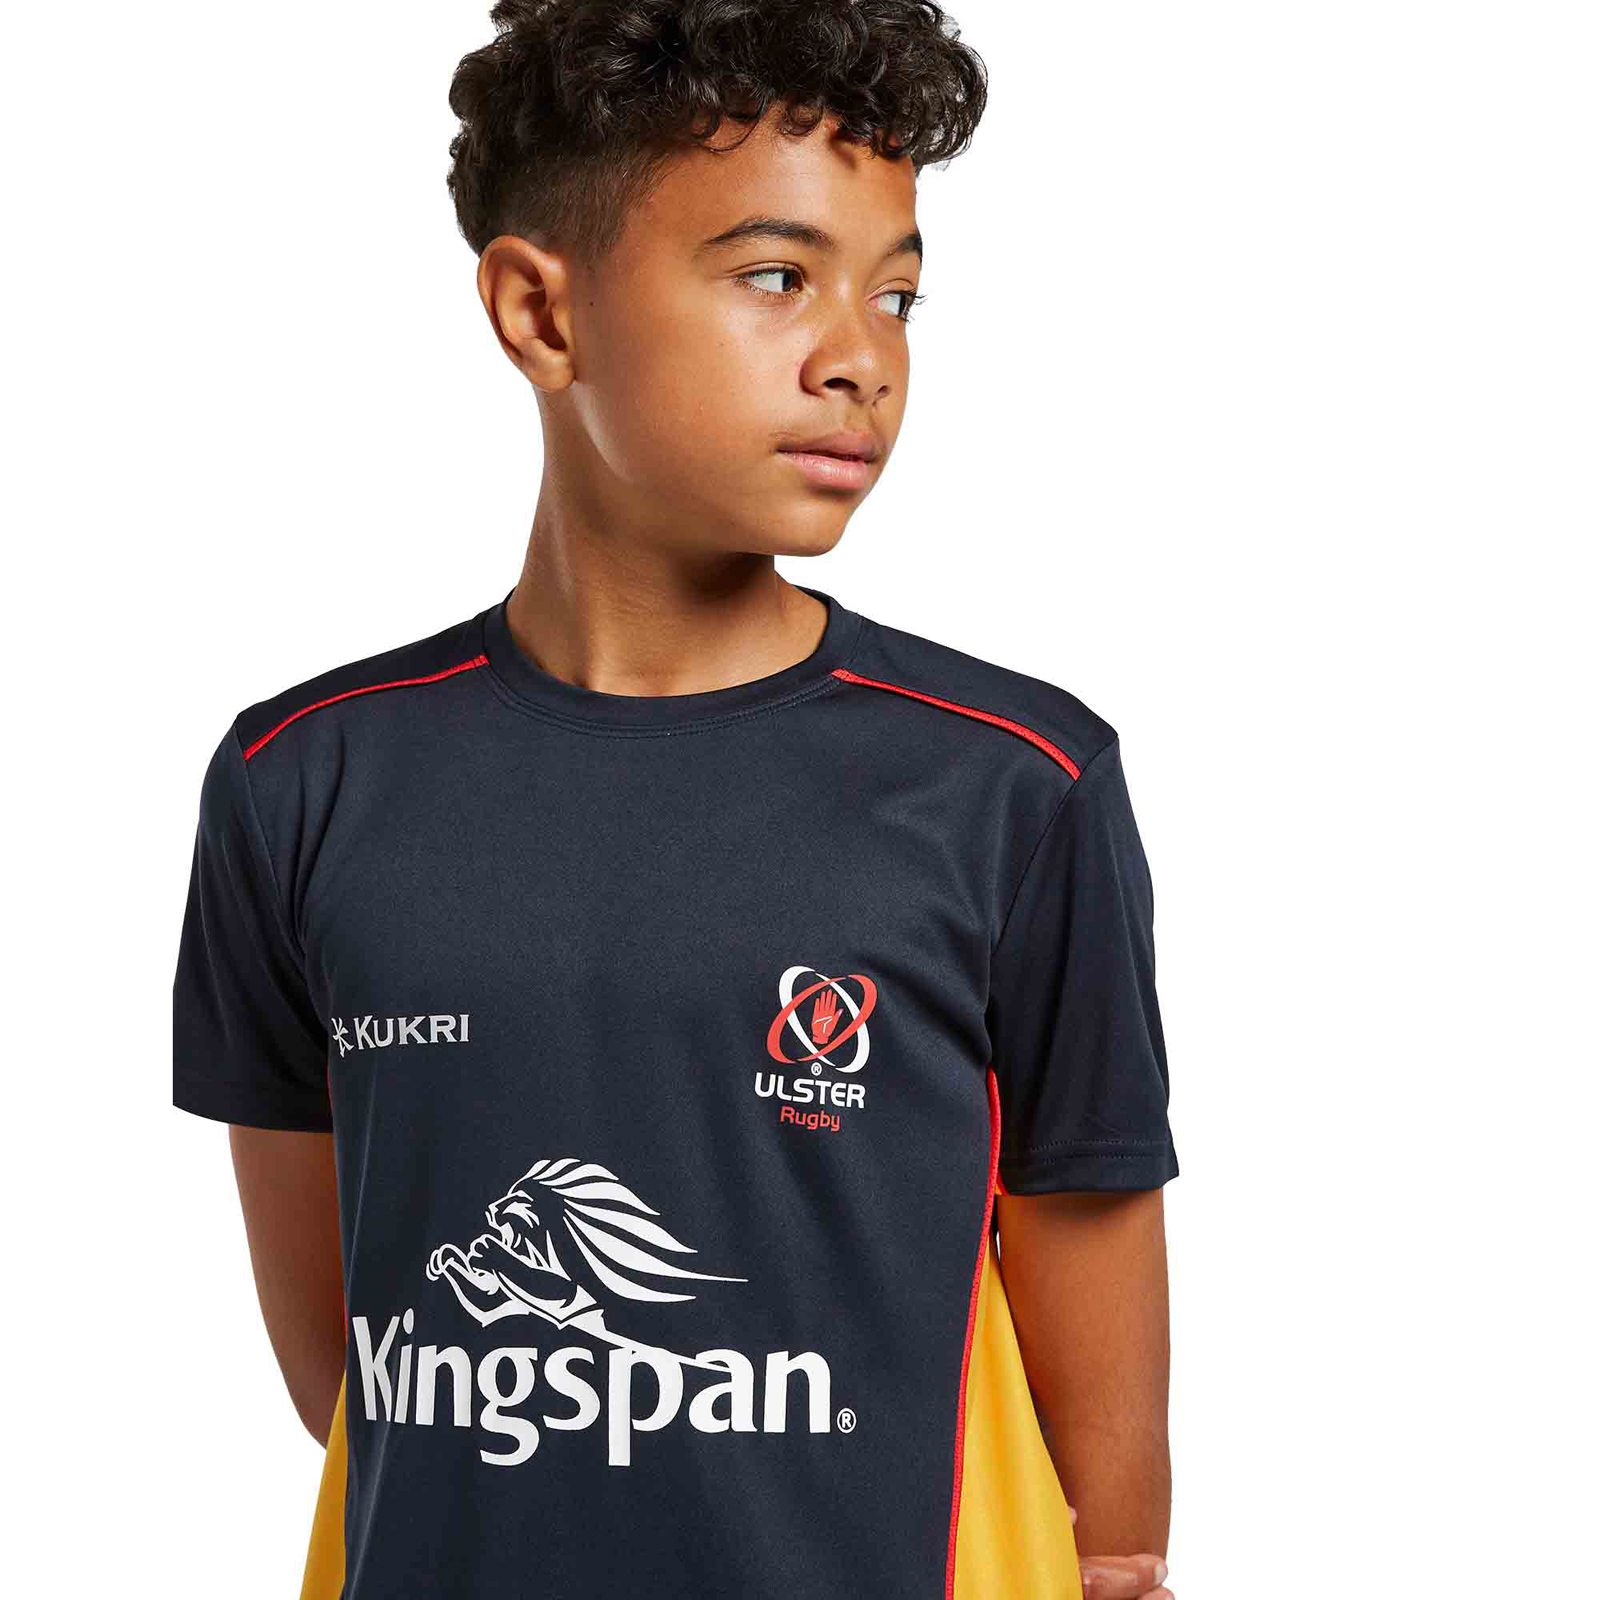 Ulster Rugby T-Shirt Kid's Kukri White Technical T-Shirt Size YM New 